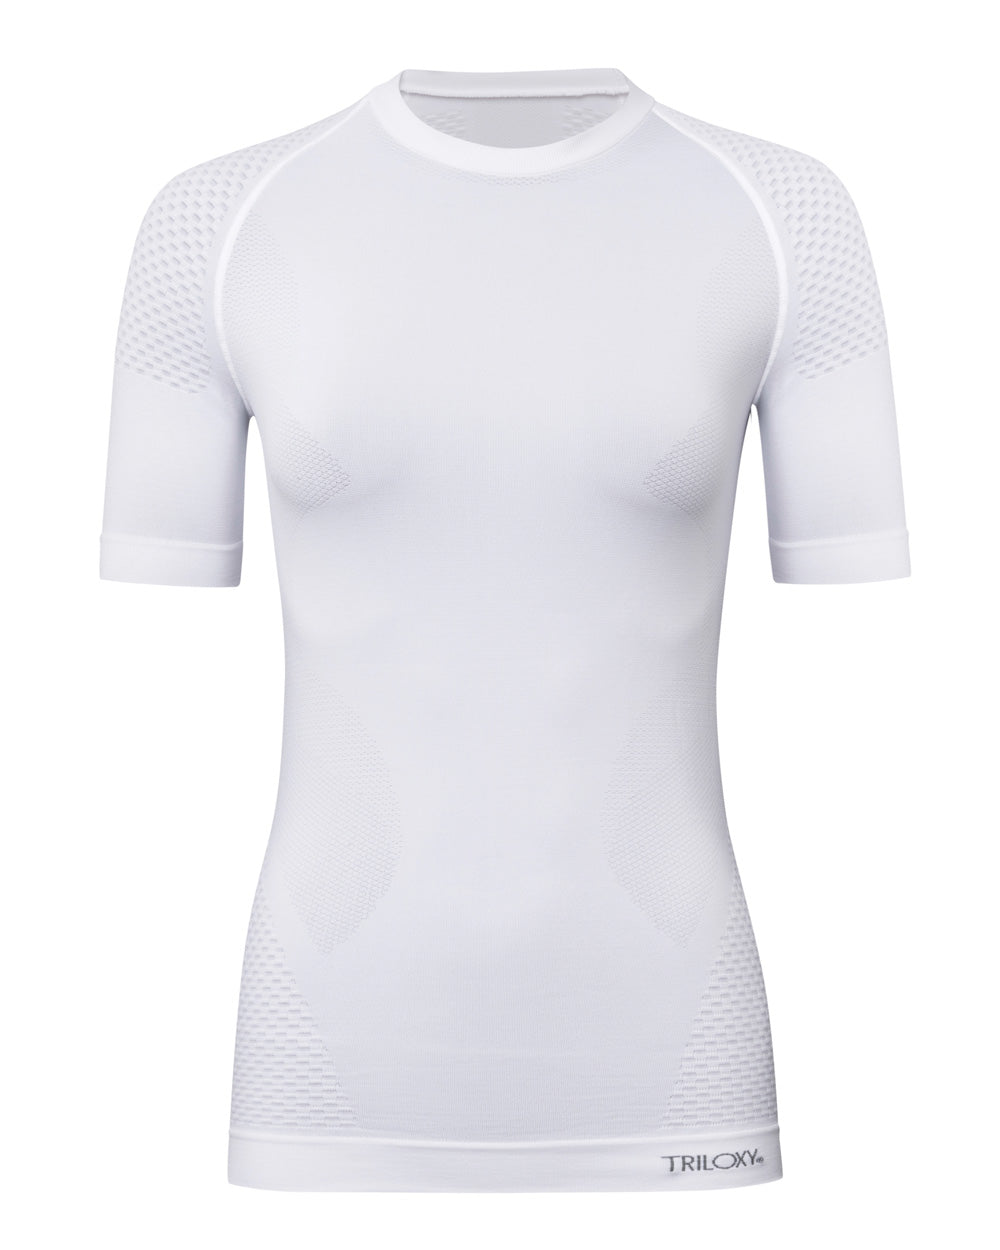 T-shirt FIR lady short sleeves - White - Medical Device triloxy